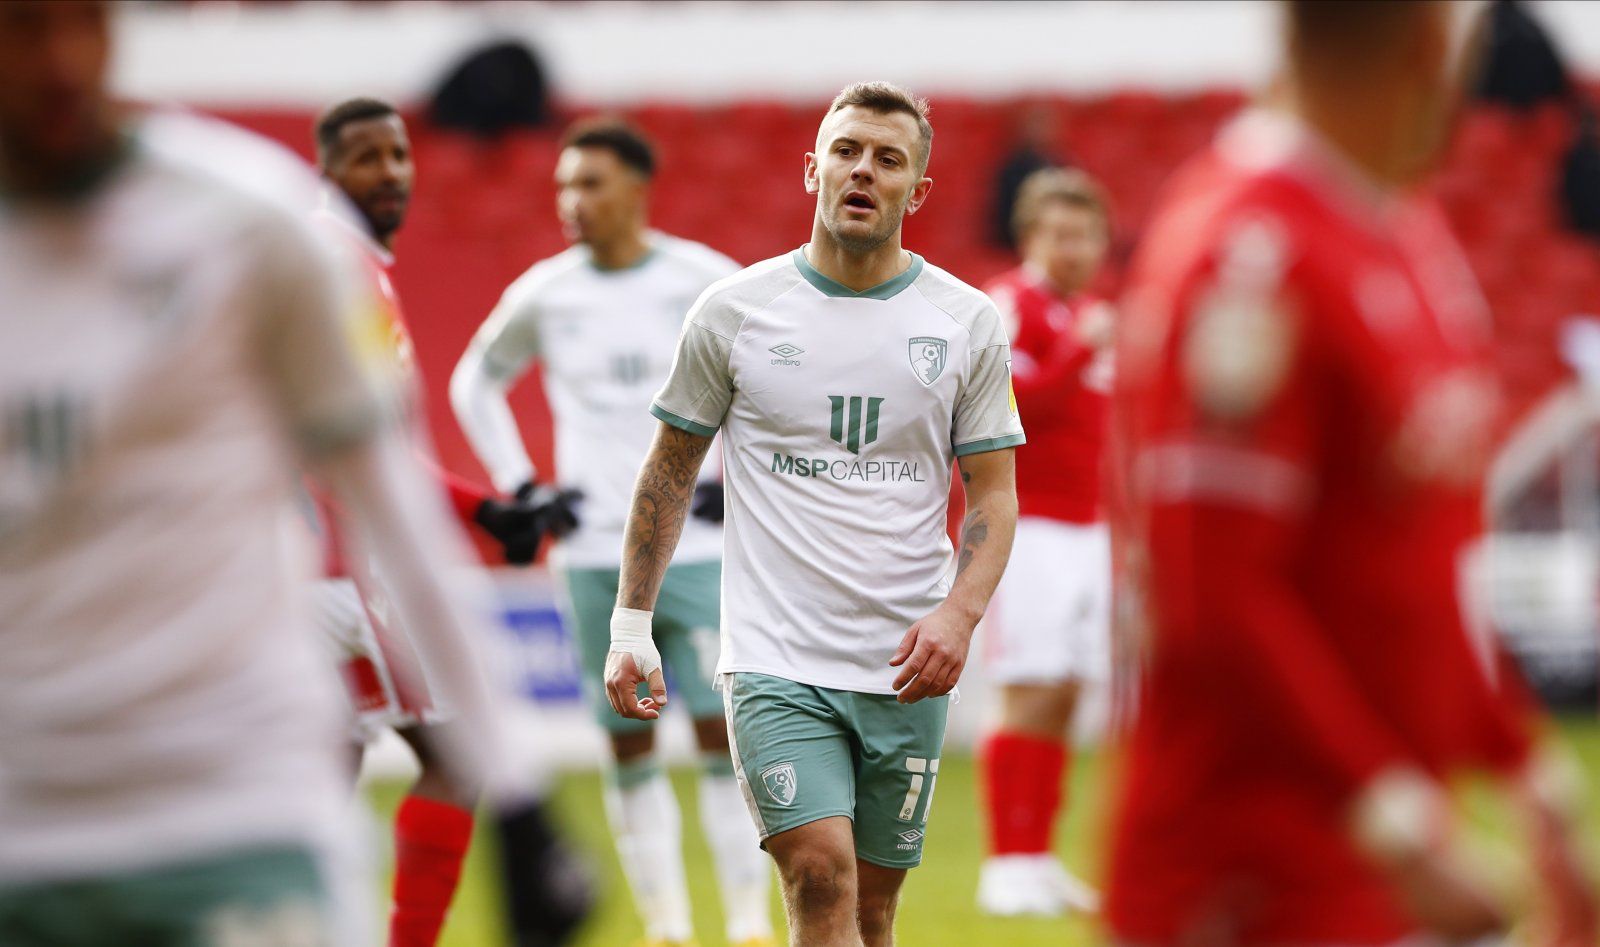 Imagine the scenes&#39;, &#39;Make it happen&#39; - Many Wigan Athletic fans react to message involving Jack Wilshere | Football League World